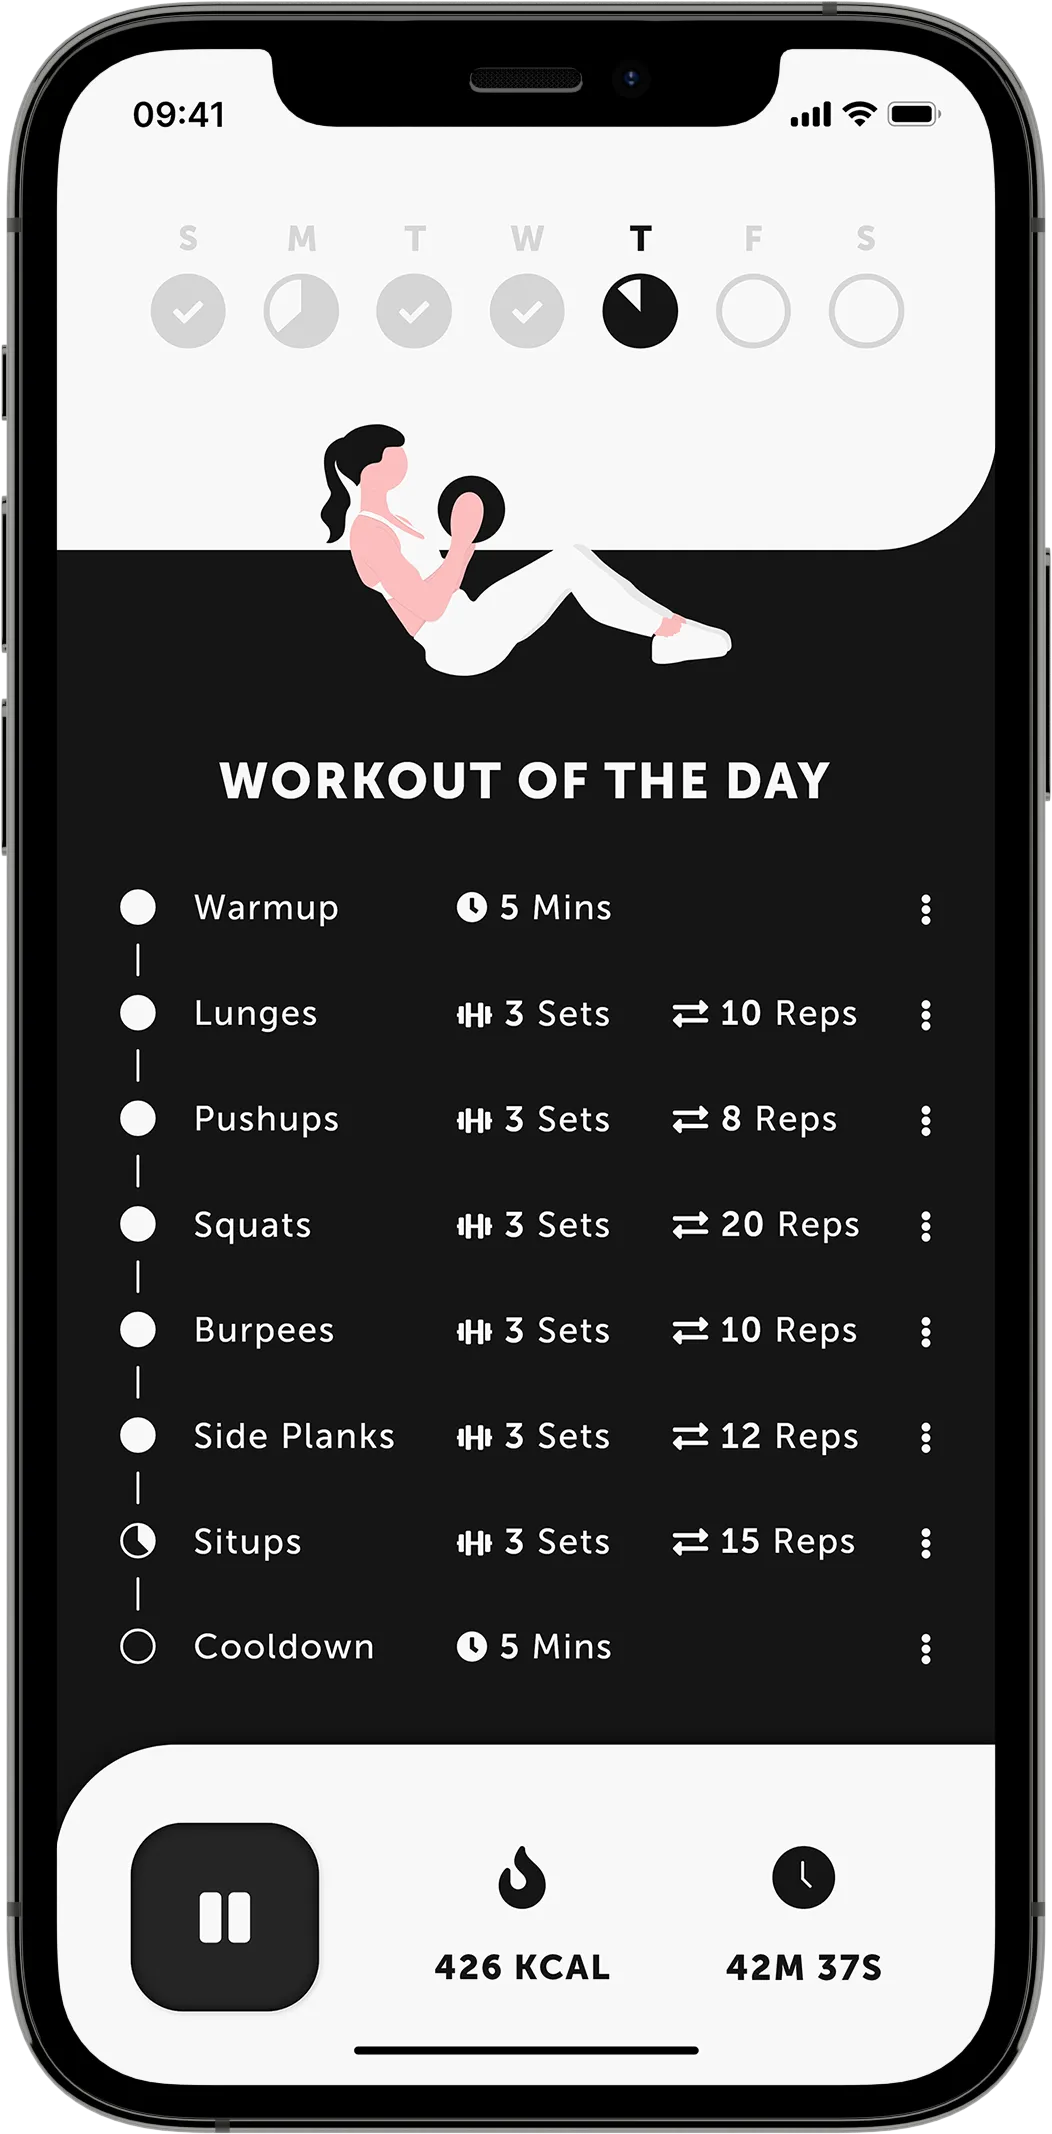 A mobile mock-up showing a workout tracker, illustration, exercise list and data, and a pause button on a black background.